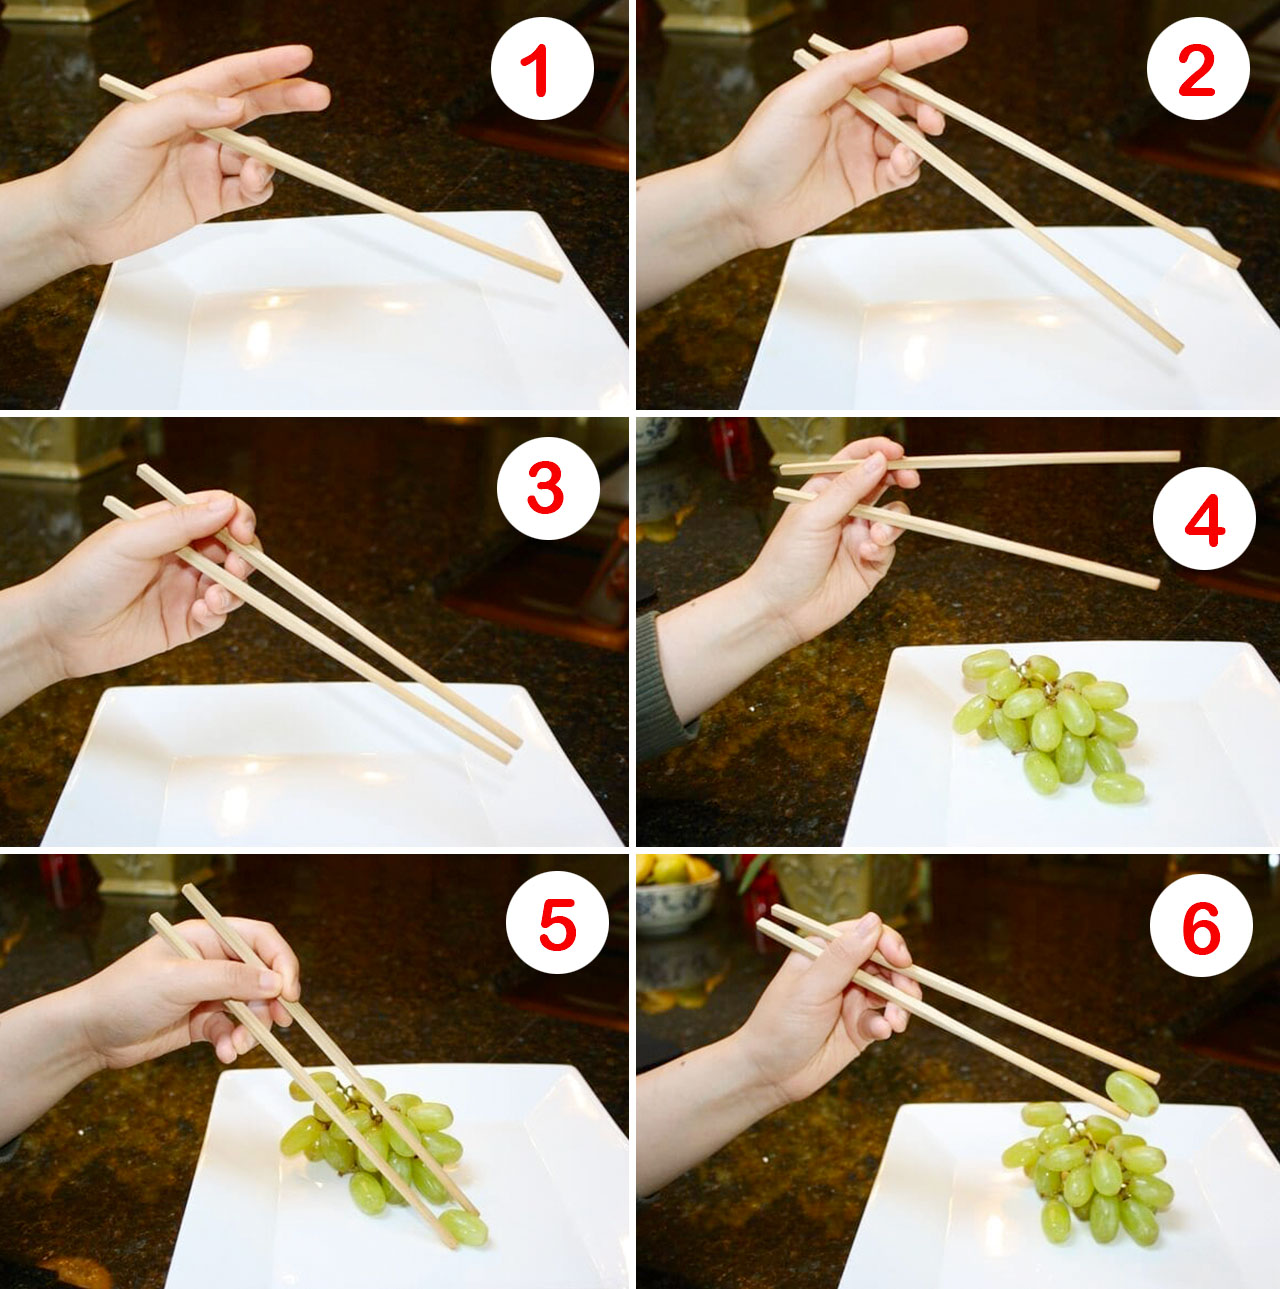 VIDEO: Eating in Japan: How to properly use chopsticks